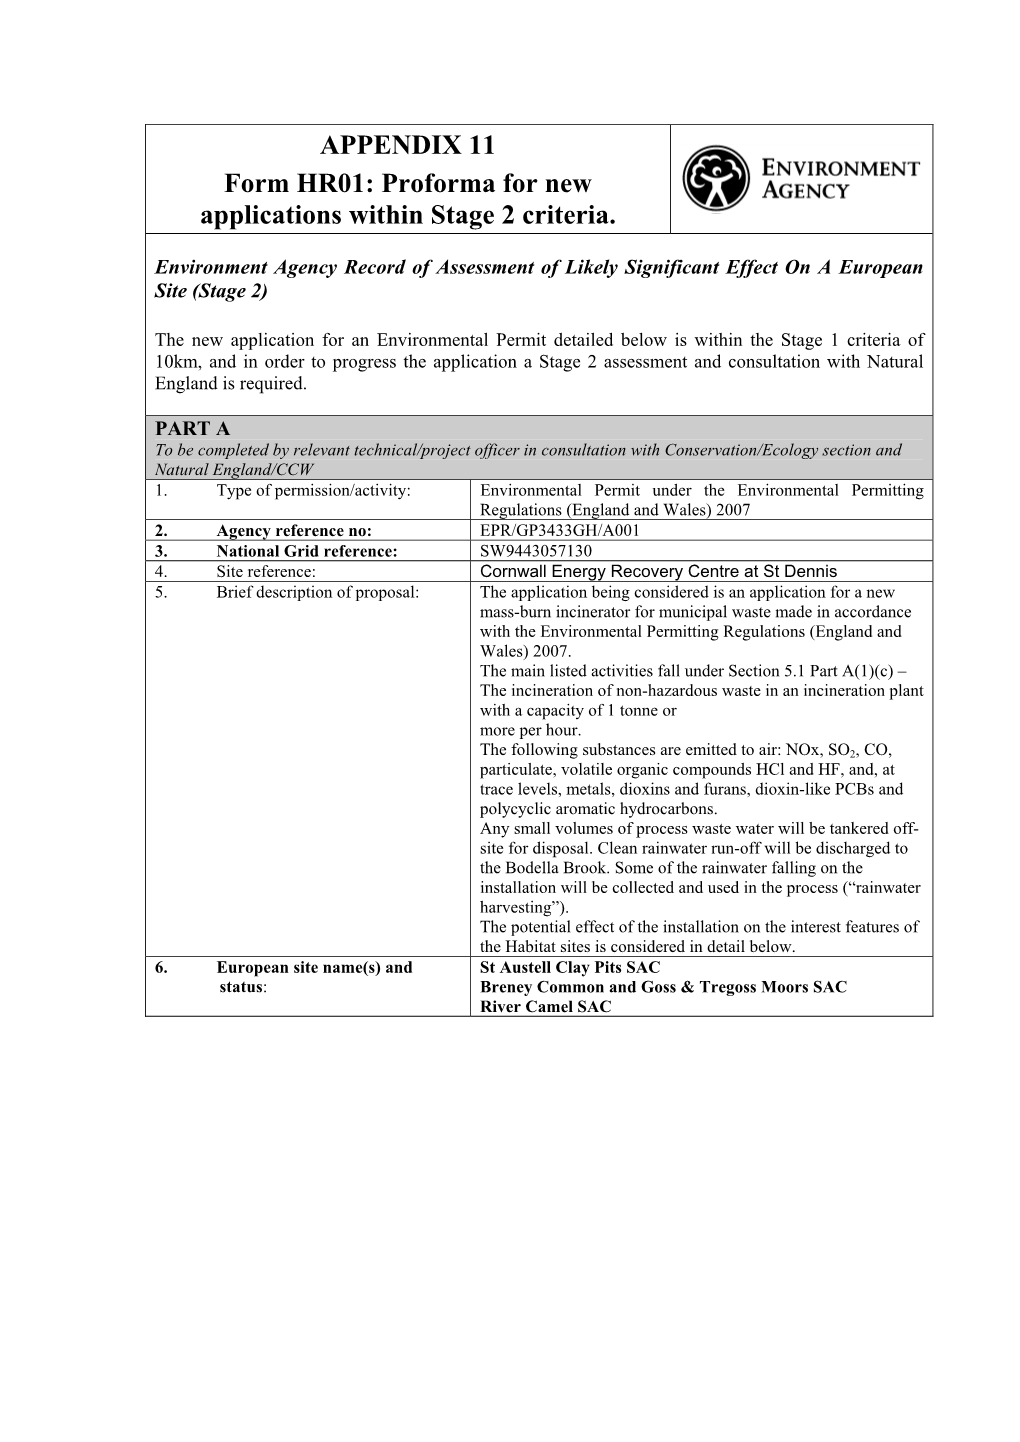 APPENDIX 11 Form HR01: Proforma for New Applications Within Stage 2 Criteria